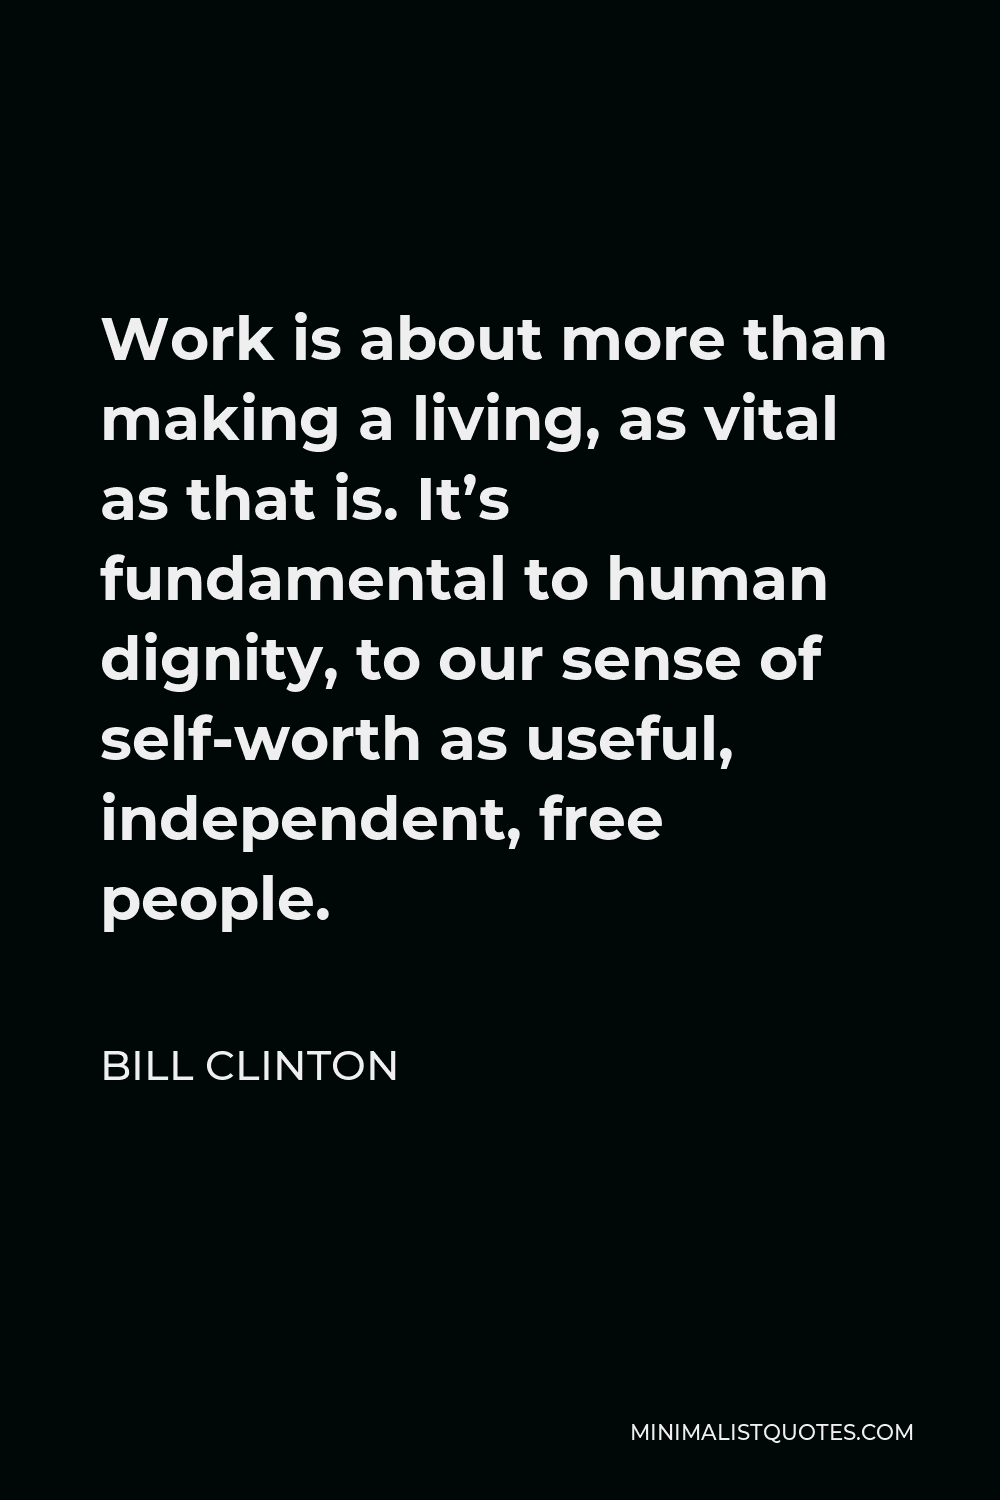 Bill Clinton Quote - Work is about more than making a living, as vital as that is. It’s fundamental to human dignity, to our sense of self-worth as useful, independent, free people.